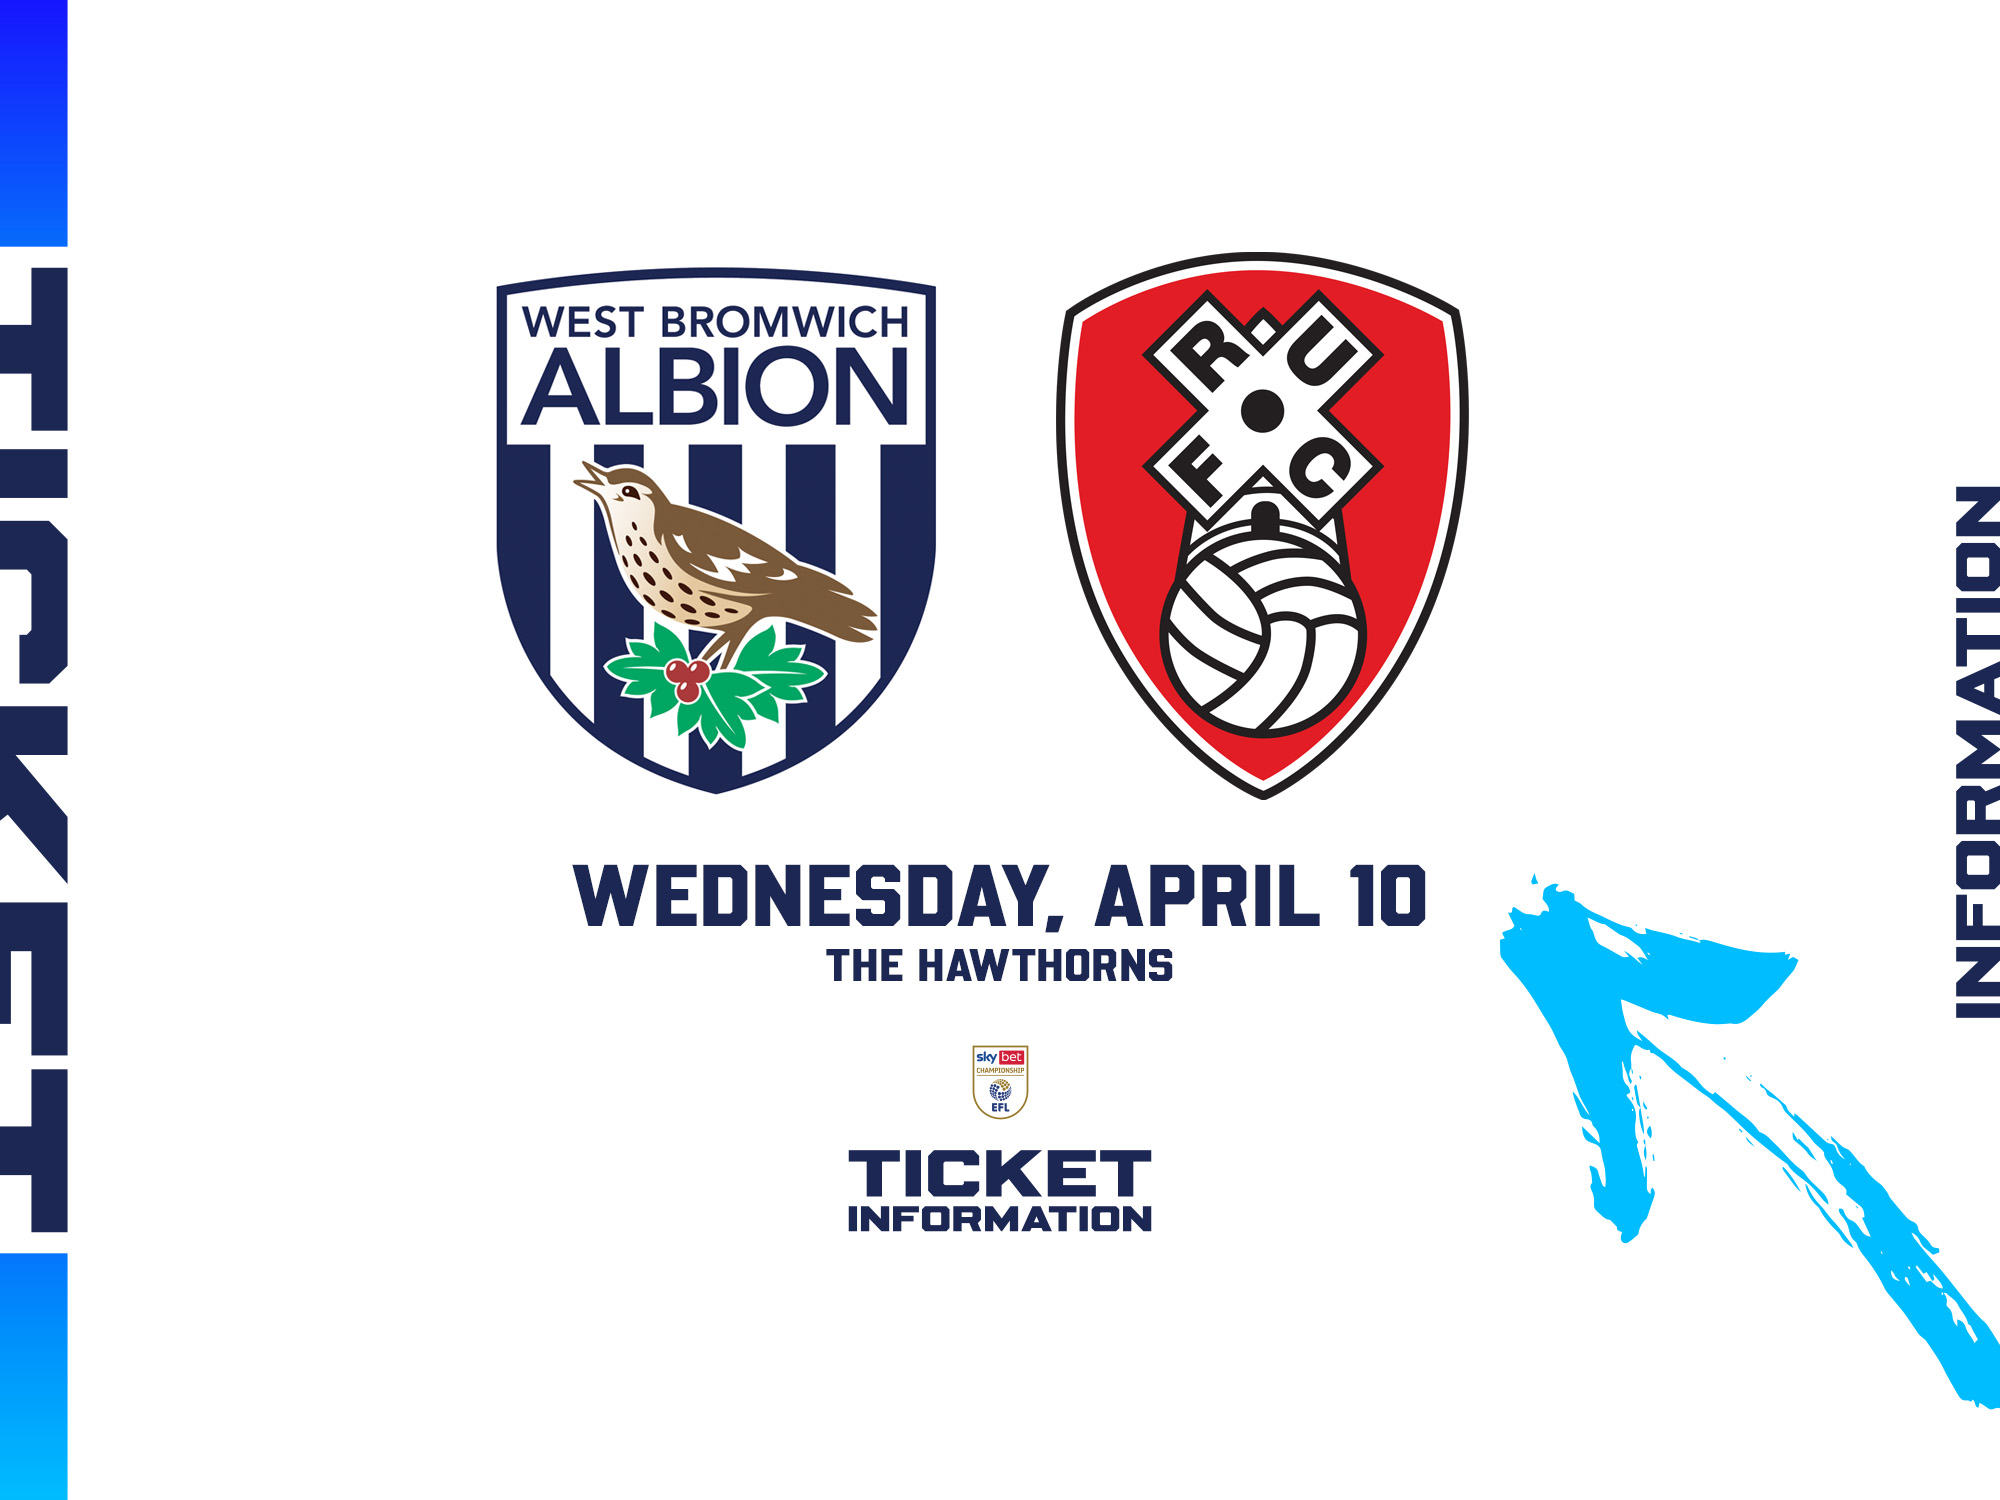 A ticket graphic displaying information for Albion's game against Rotherham